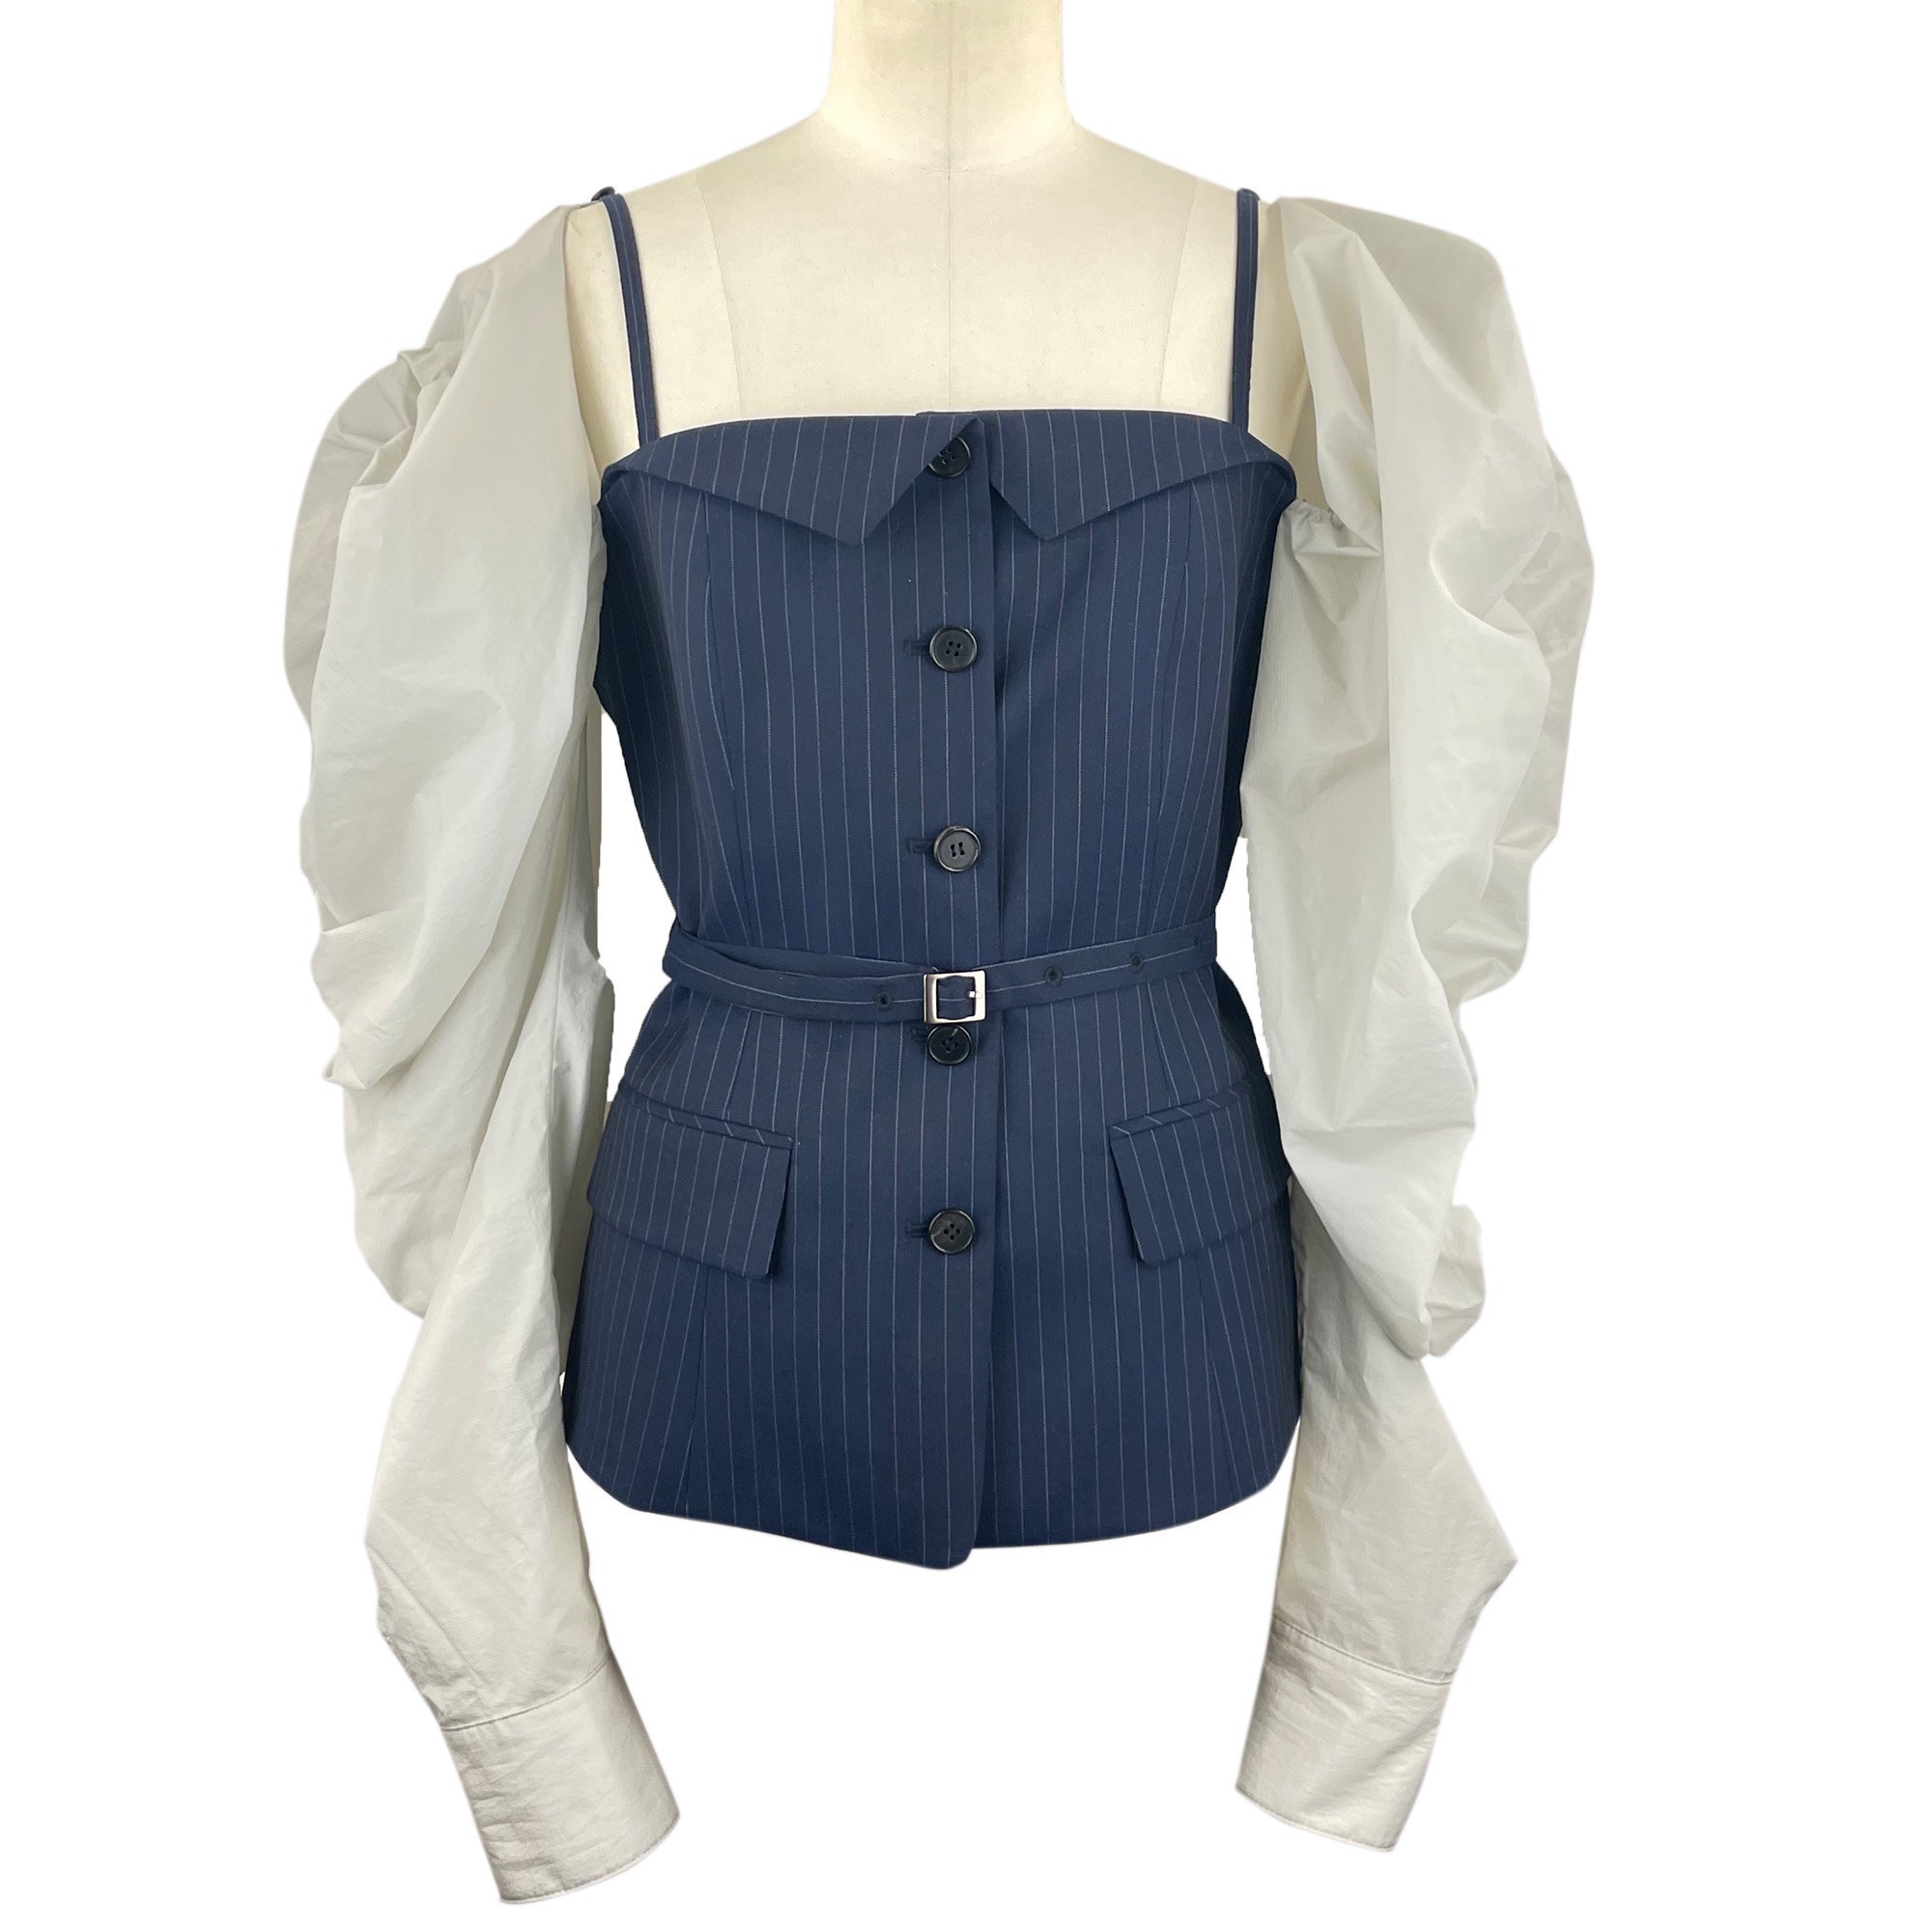 <img class='new_mark_img1' src='https://img.shop-pro.jp/img/new/icons7.gif' style='border:none;display:inline;margin:0px;padding:0px;width:auto;' />BESFXXK / WIND SLEEVE OPEN SHOULDER BLOUSE / STRIPE